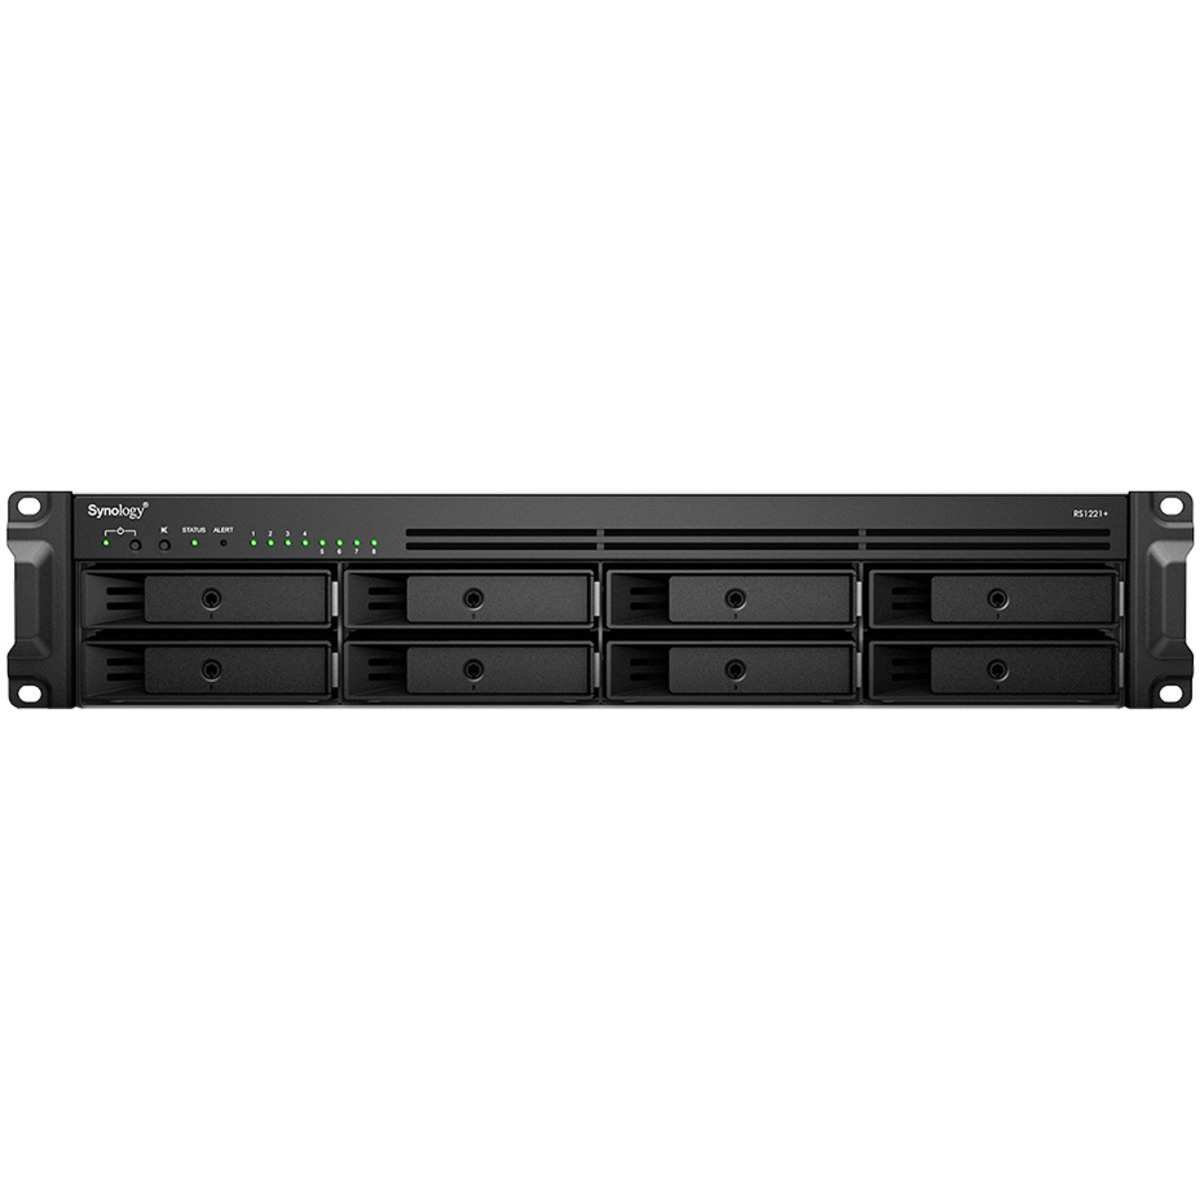 buy $3010 Synology RackStation RS1221RP+ 32tb RackMount NAS - Network Attached Storage Device 8x4000gb Western Digital Blue WD40EZRZ 3.5 5400rpm SATA 6Gb/s HDD CONSUMER Class Drives Installed - Burn-In Tested - nas headquarters buy network attached storage server device das new raid-5 free shipping usa christmas new year holiday sale RackStation RS1221RP+